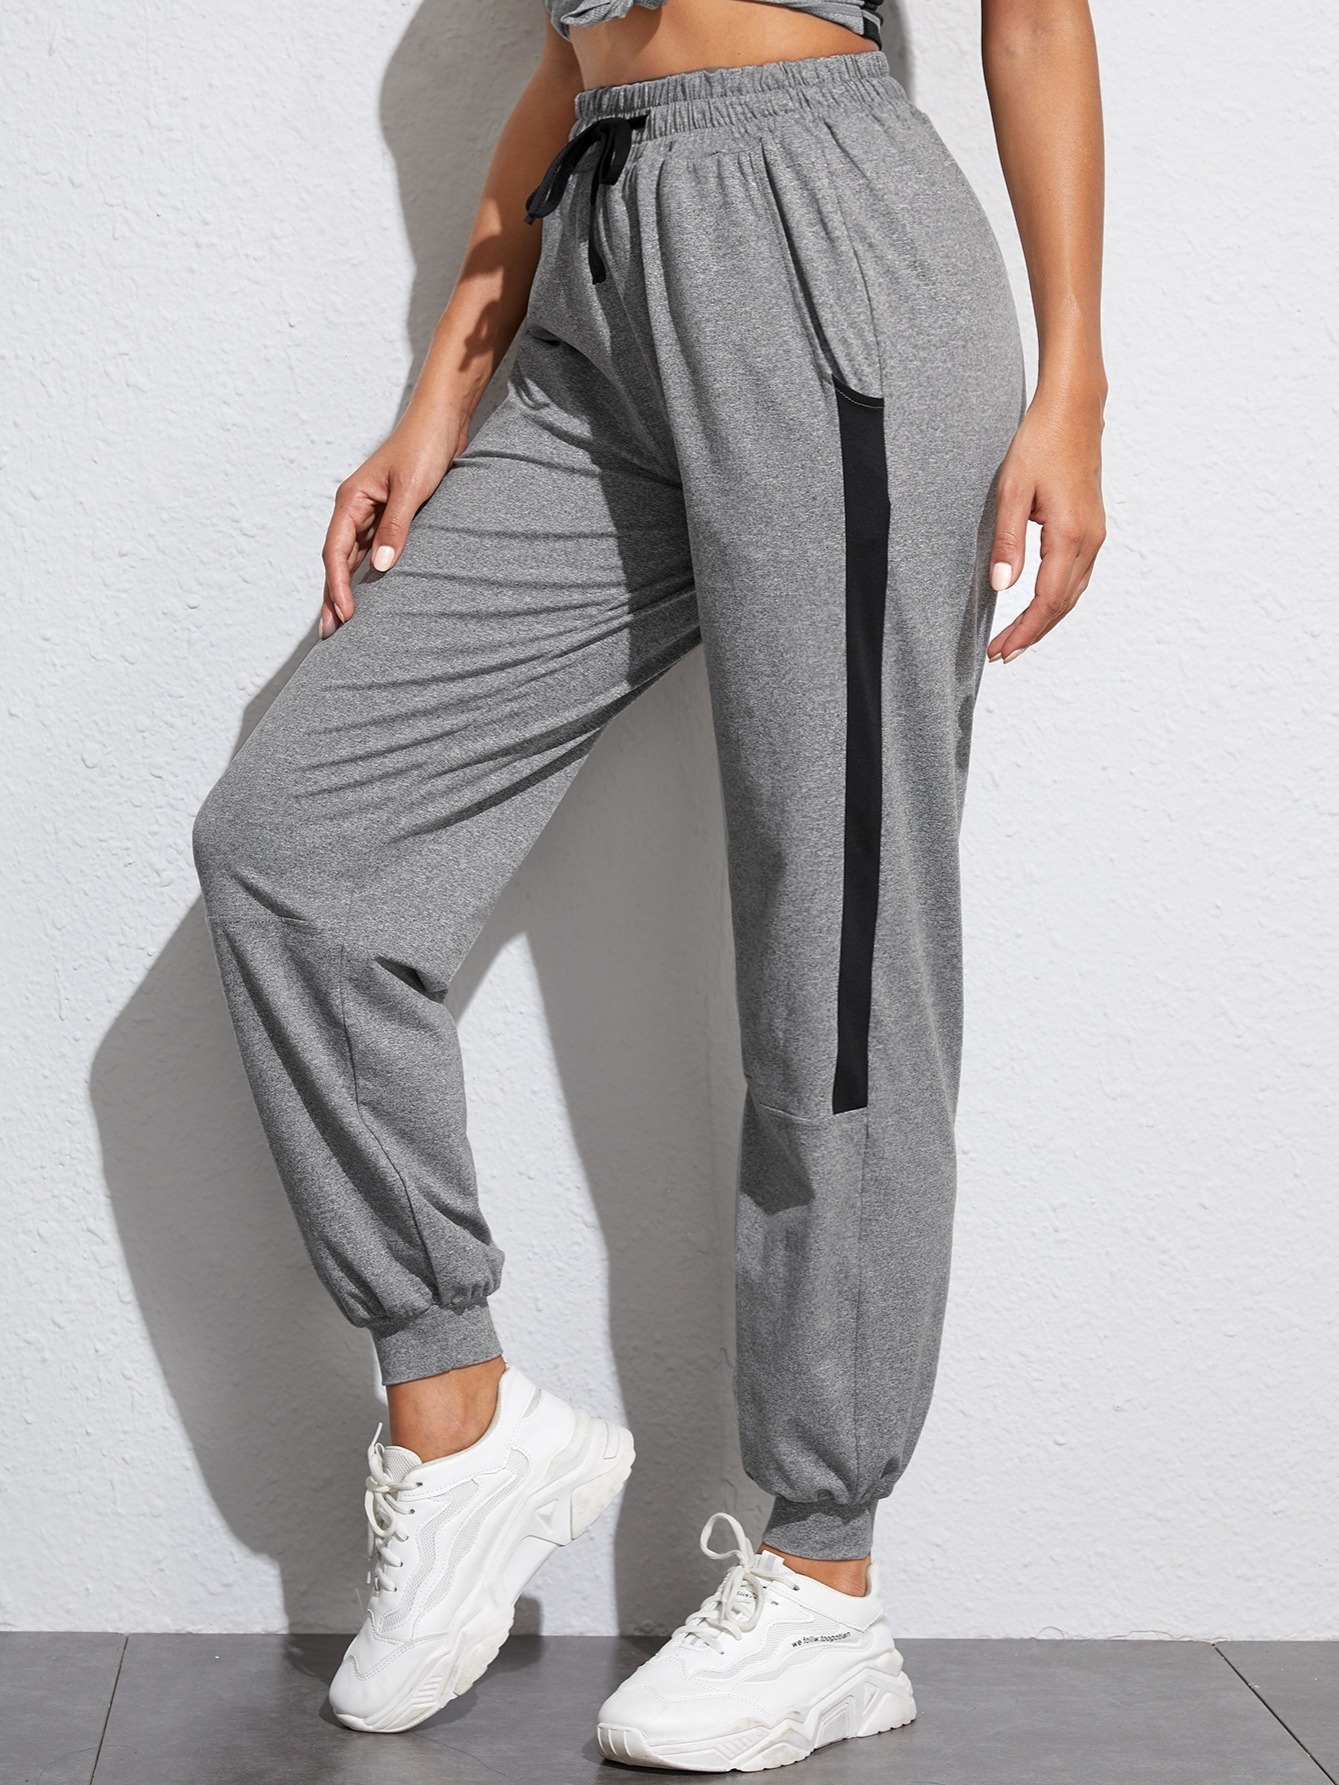 Comfortable Women's Joggers with Drawstring Waist and Stylish Black Stripe